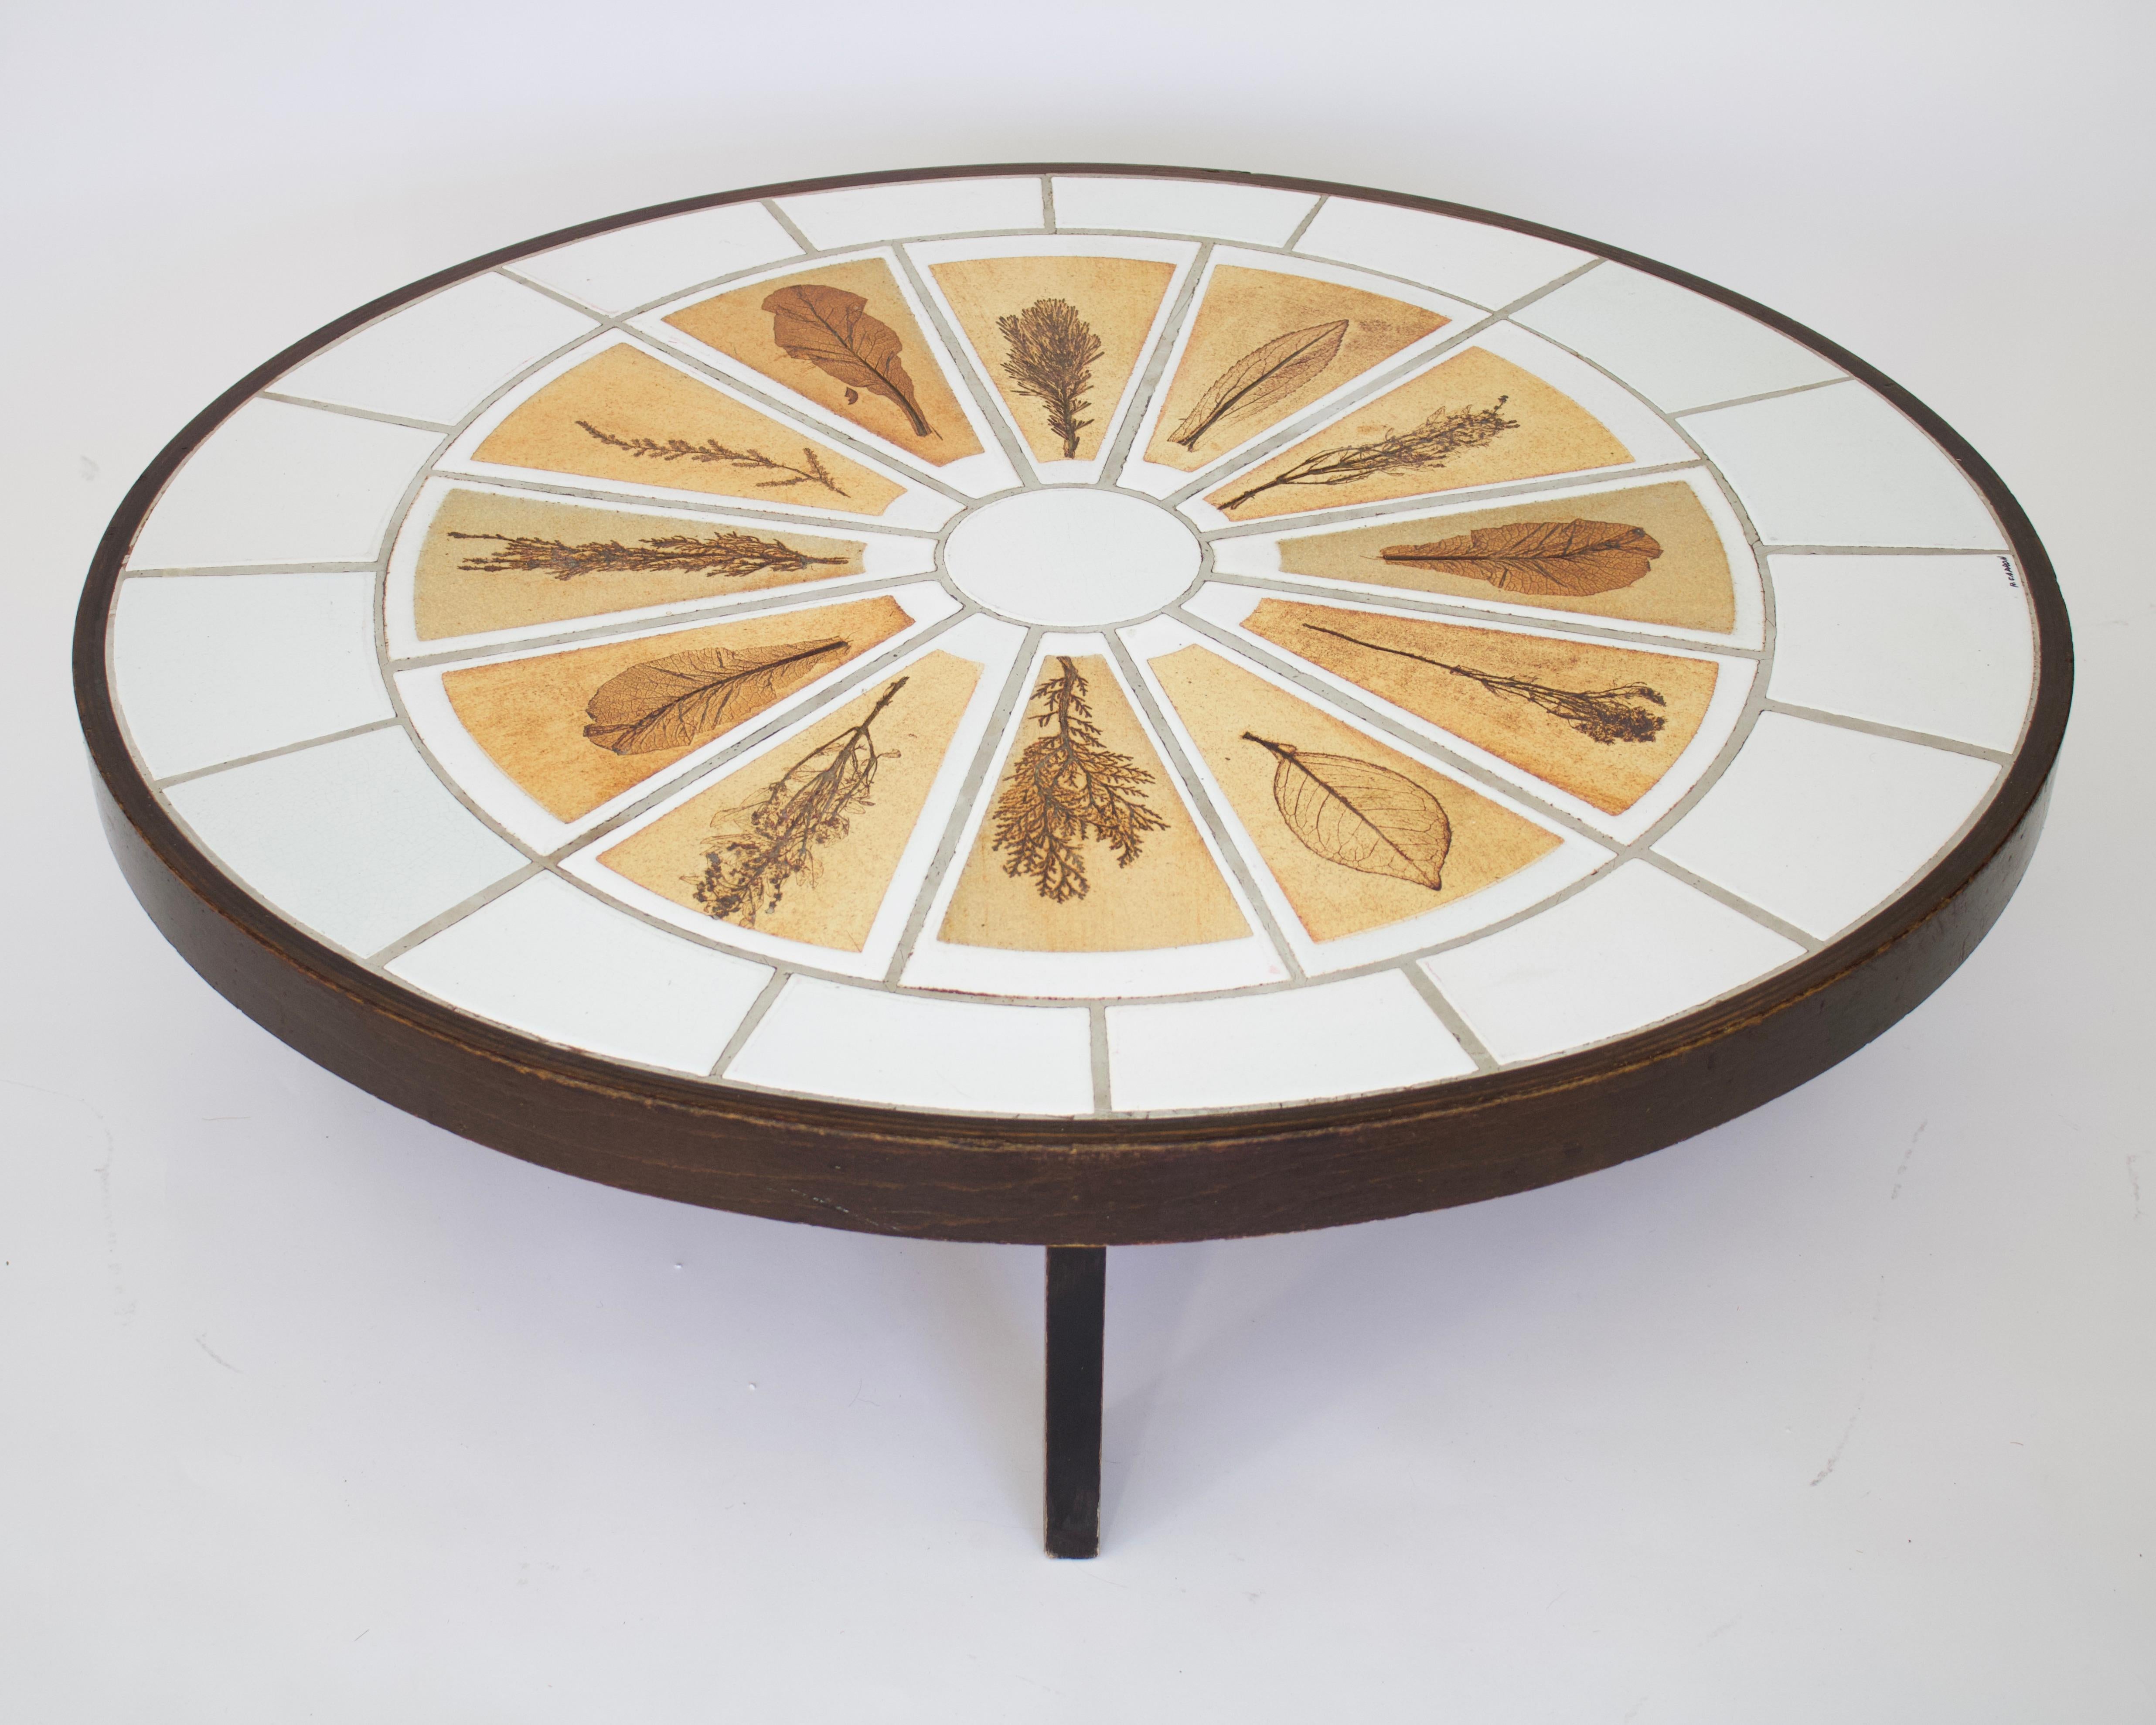 Mid-20th Century Roger Capron French Ceramic Oval Coffee Table with Leaf Decorations For Sale